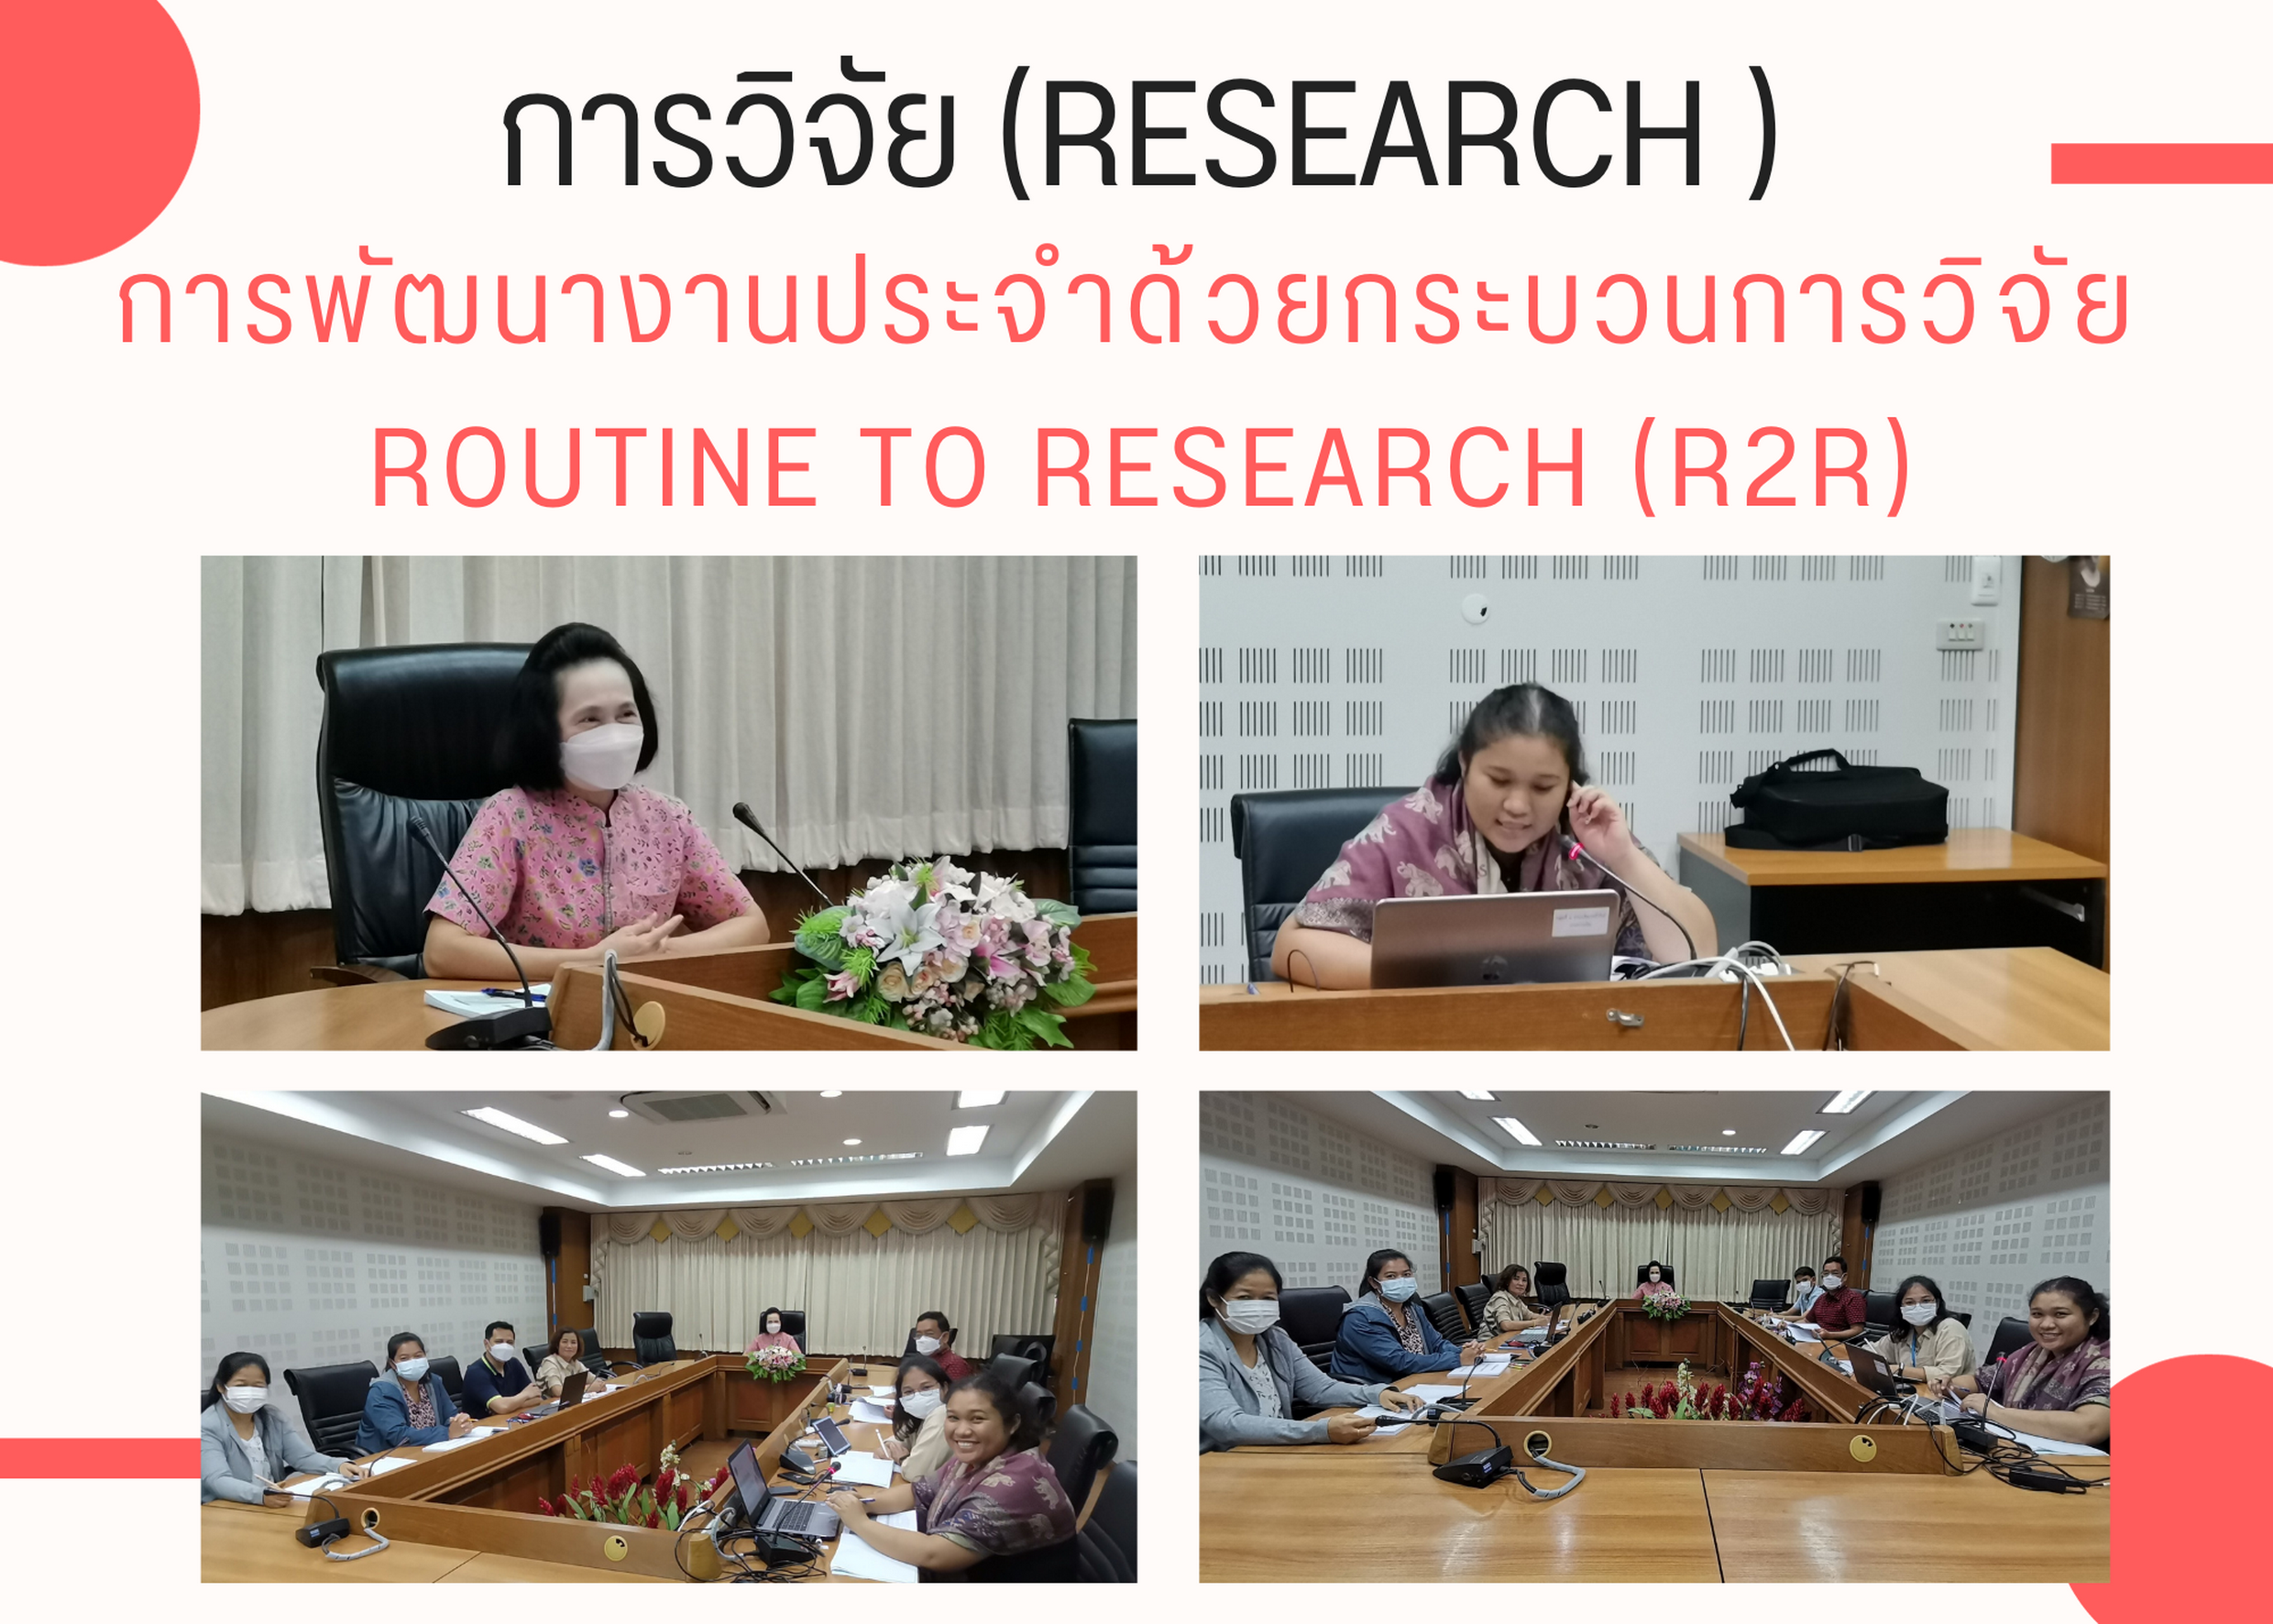 2. research R2R